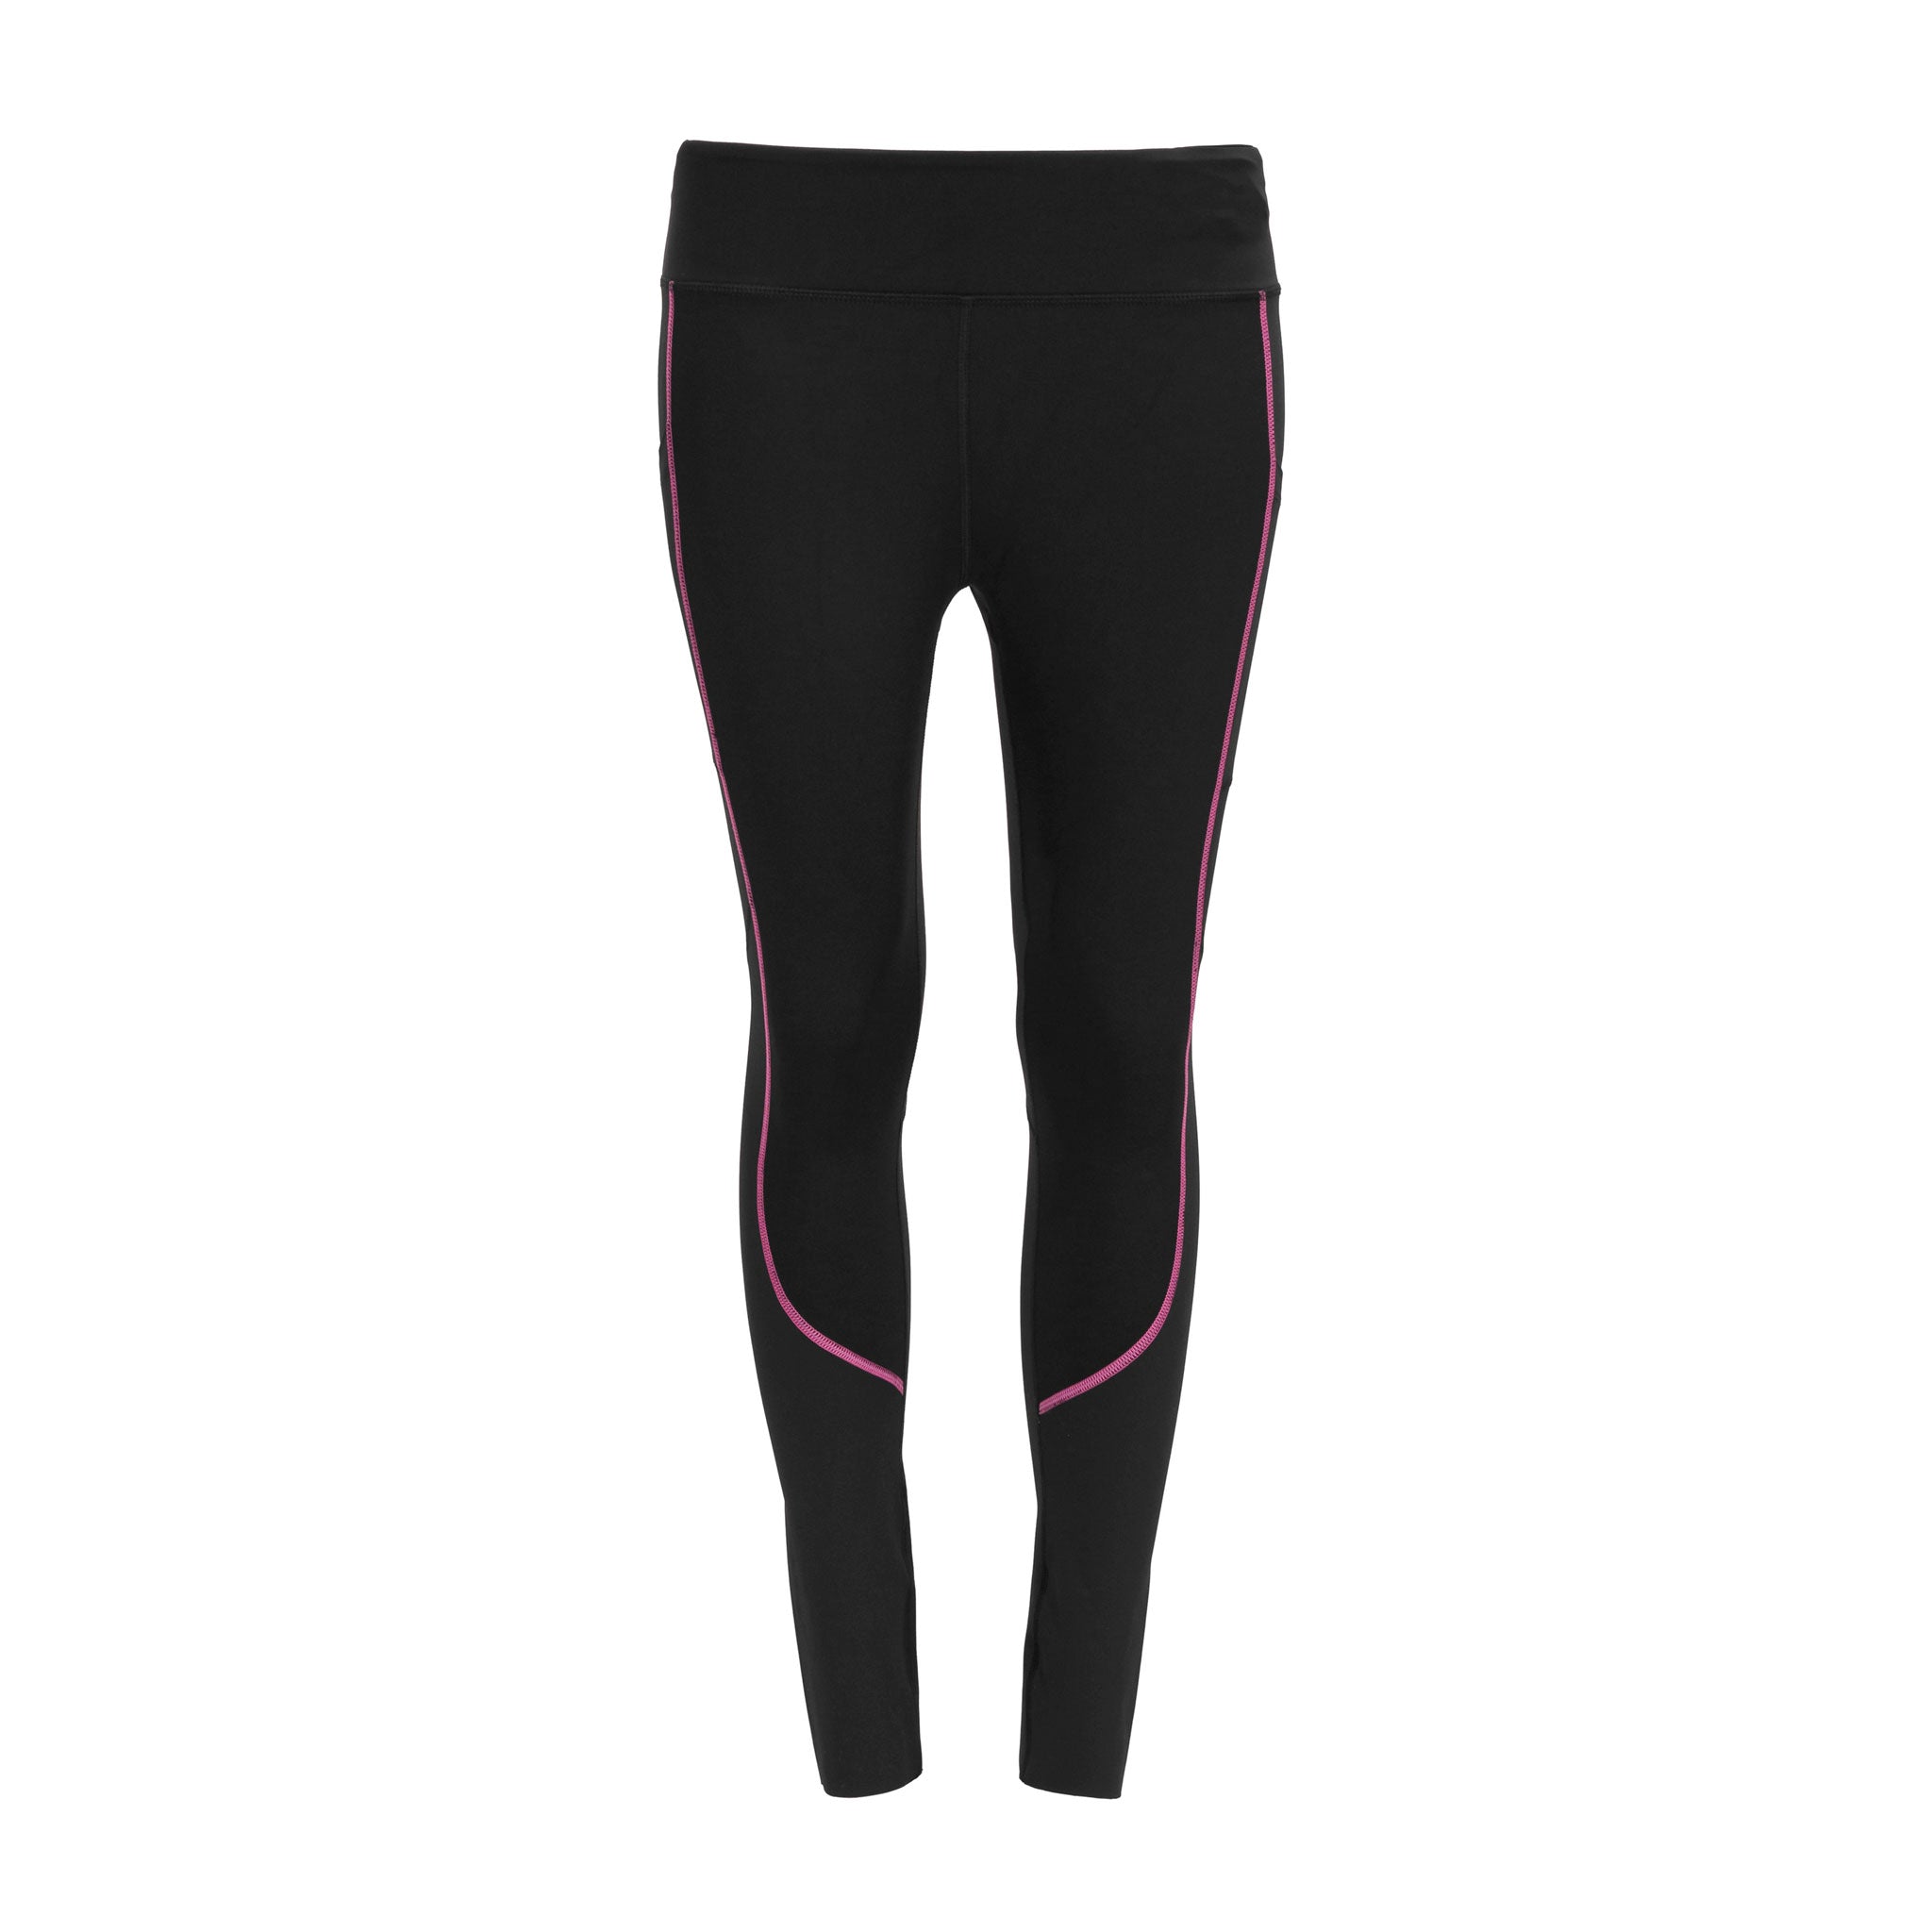 sync-performance-women's-compression-3/4-leggings-black-pink-front